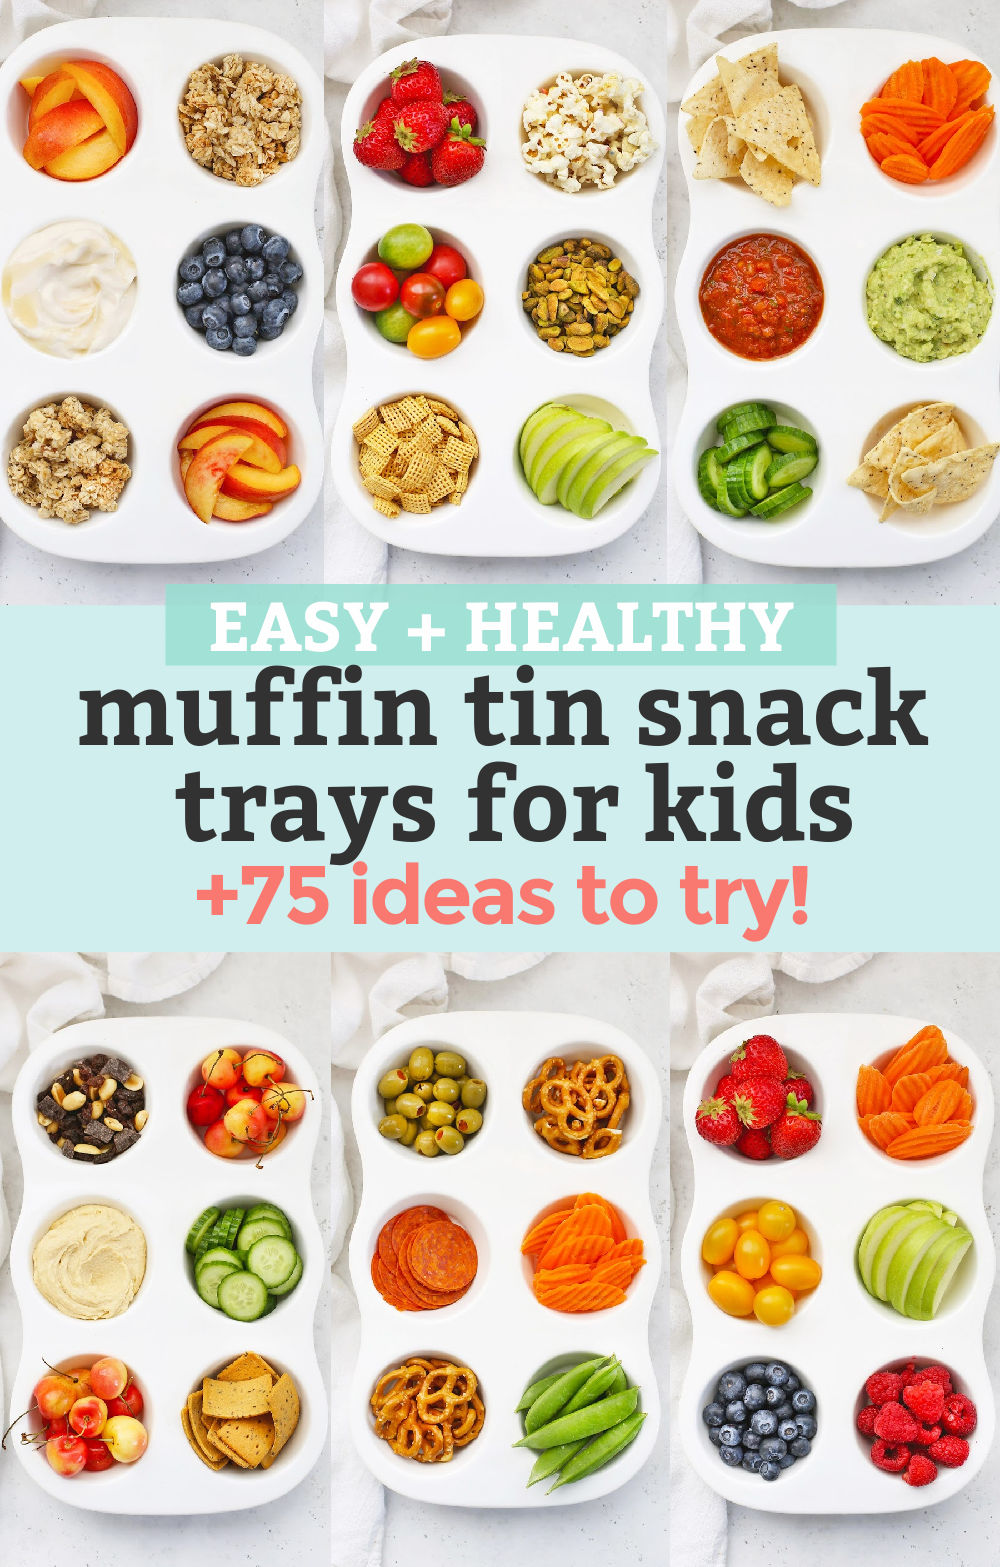 Collage of images of muffin tin snack trays for kids with text overlay that reads "Easy + Healthy Muffin Tin Snack Trays for Kids +75 Ideas to Try"